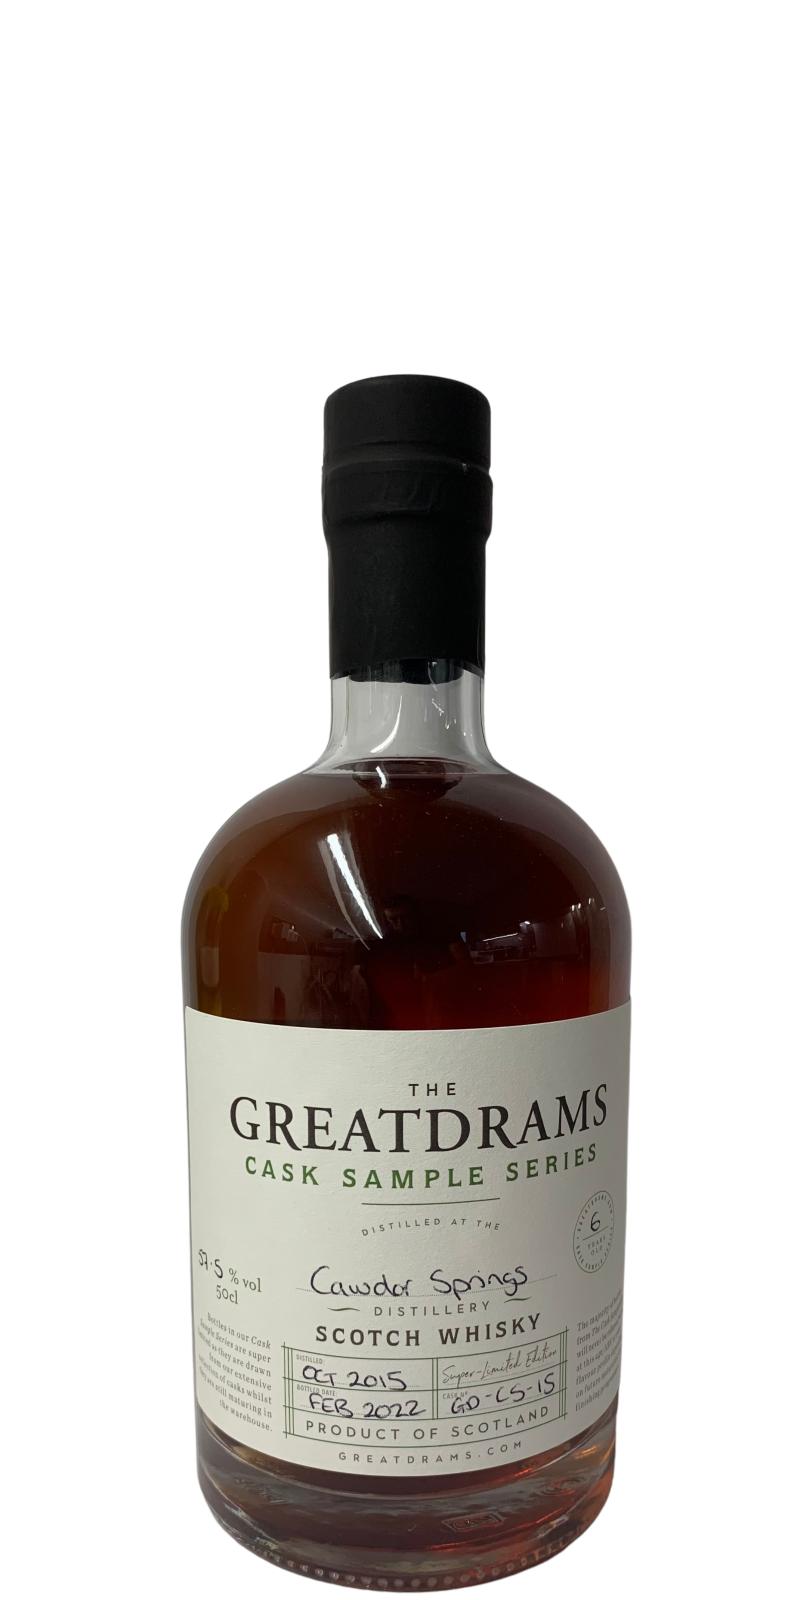 The Greatdrams 2015 GtDr Cask Sample Series Chateau Margaux 57.5% 500ml